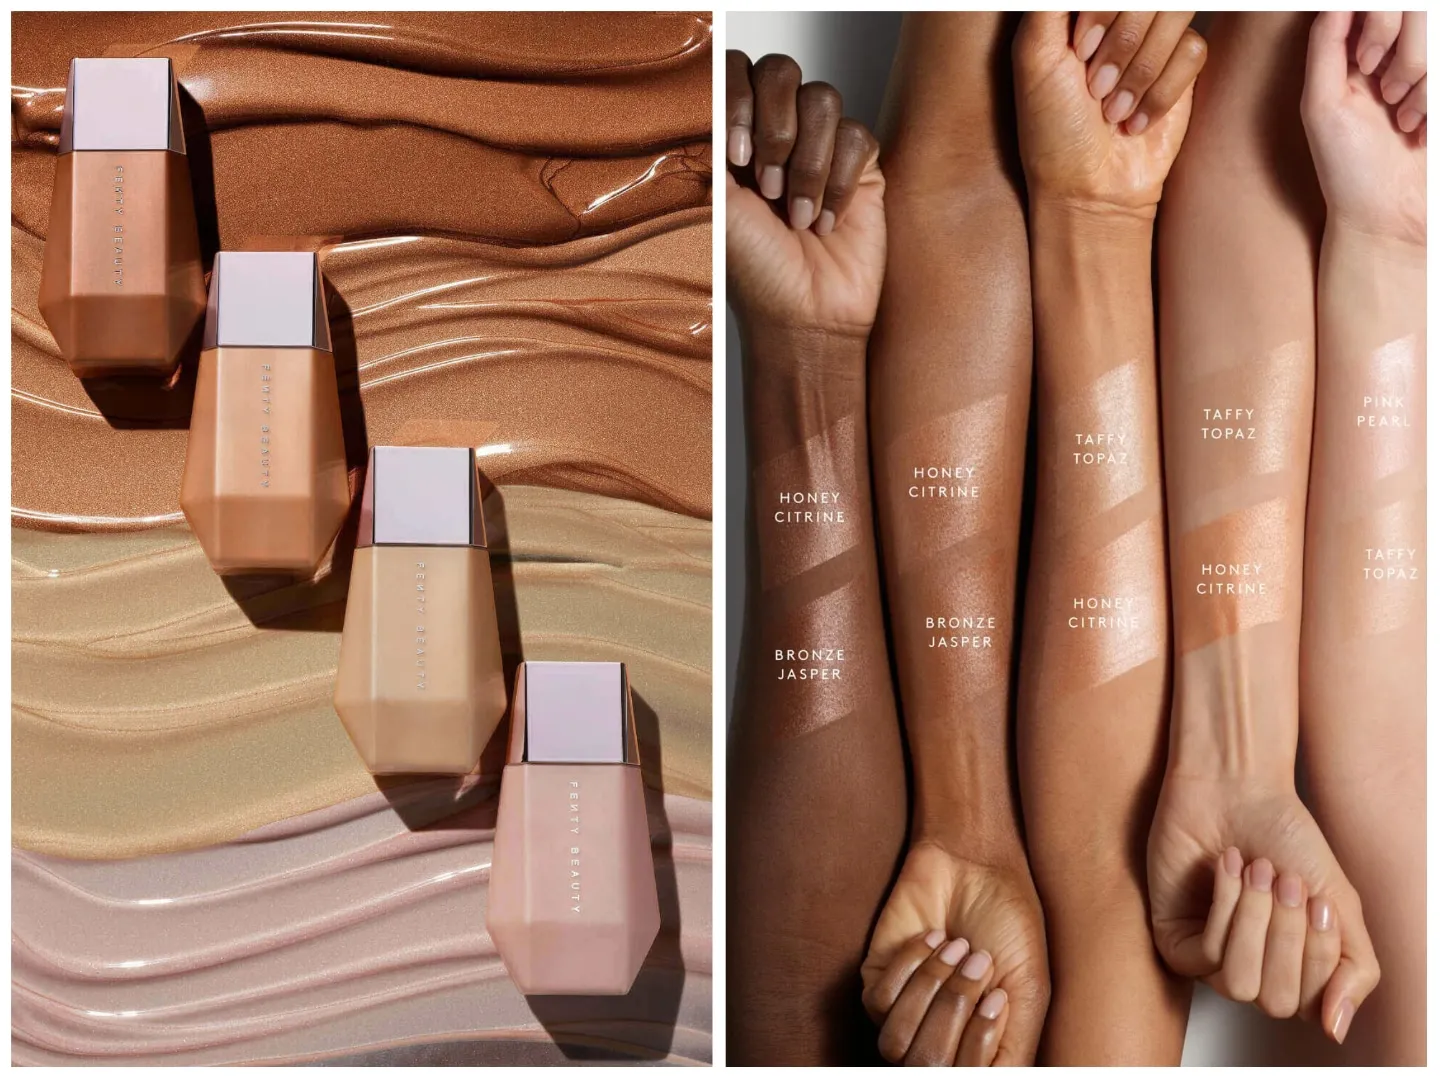 Fenty Beauty’s latest product combines skincare and makeup